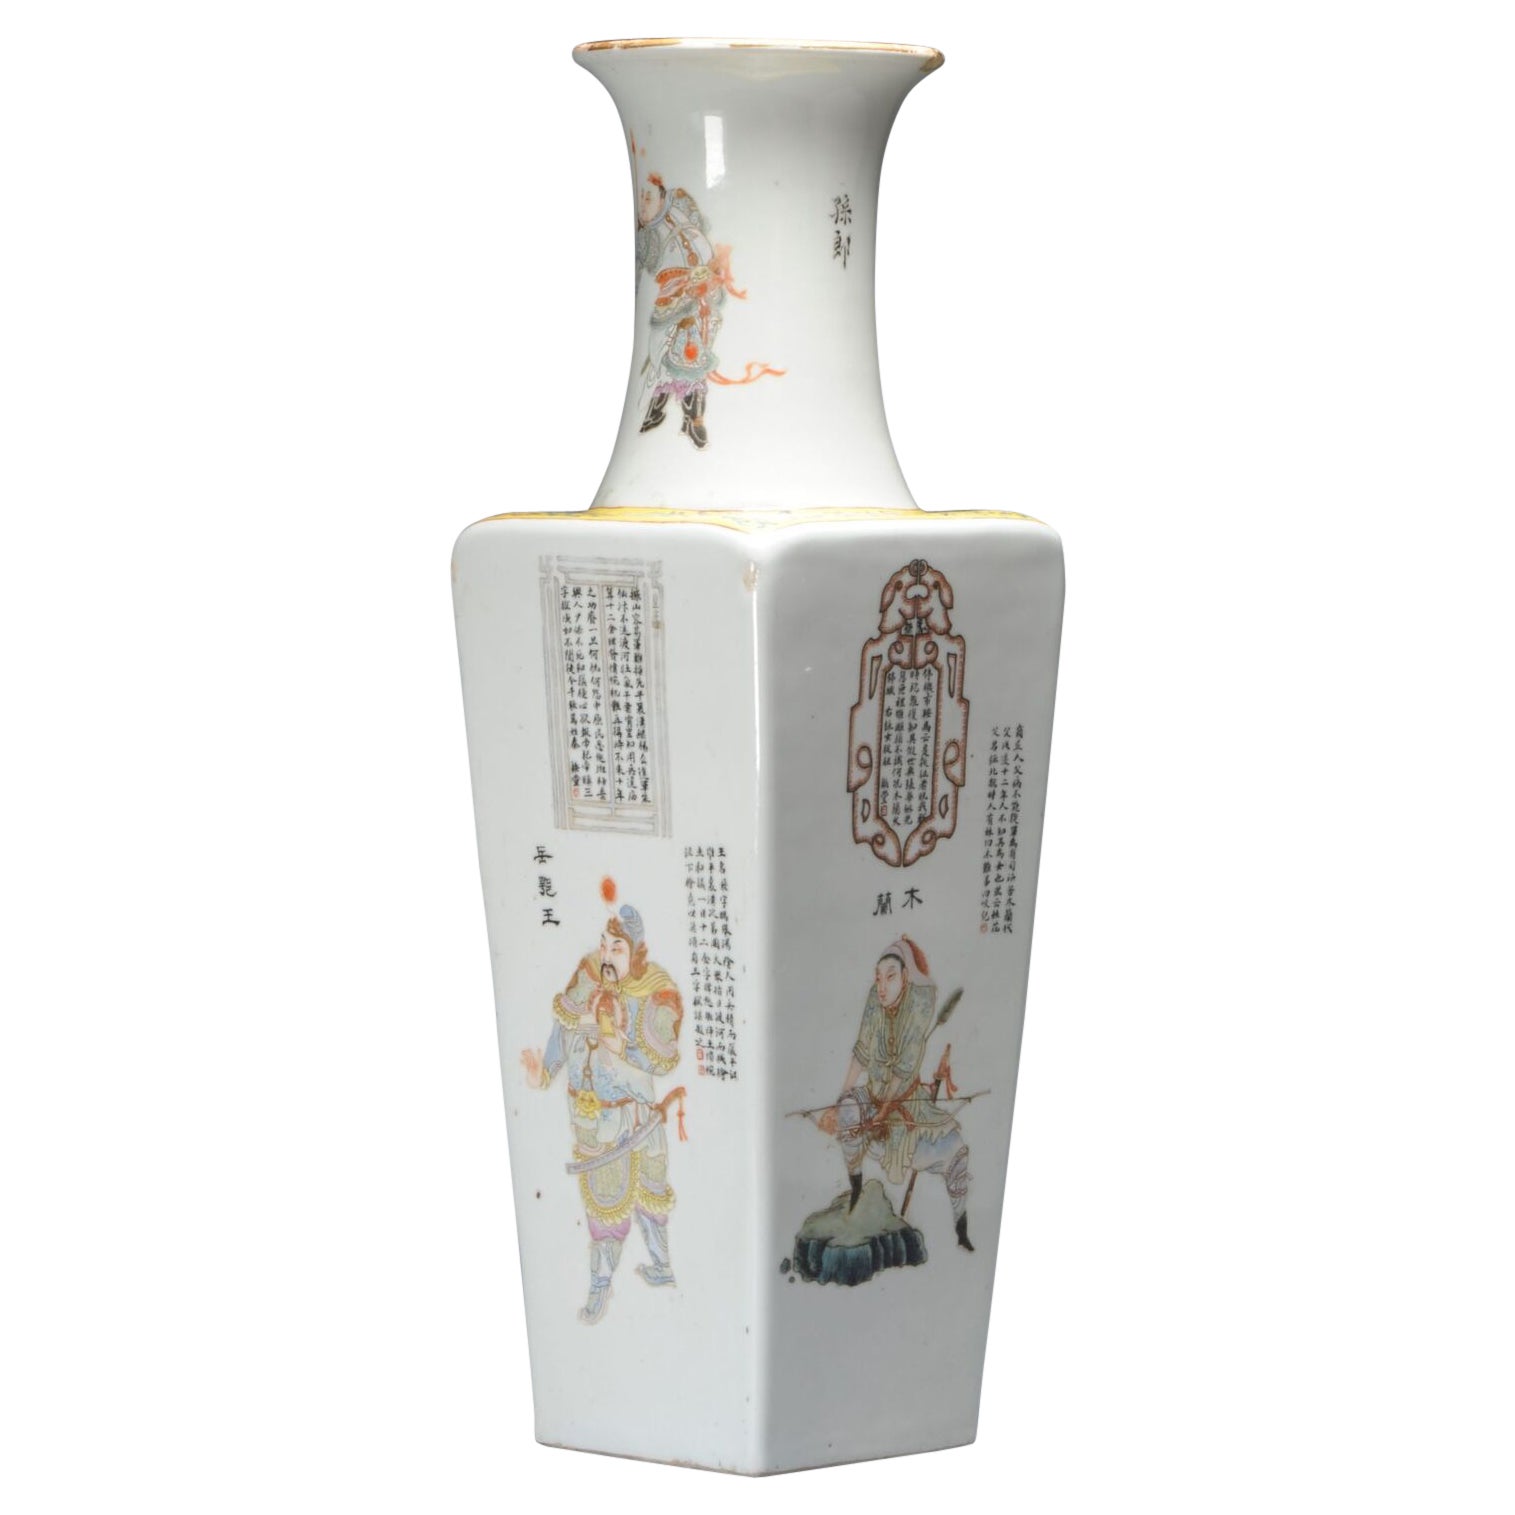 Antique Porcelain Square Baluster Vase - Wu Shuang Pu, 19th/Early 20th Century For Sale